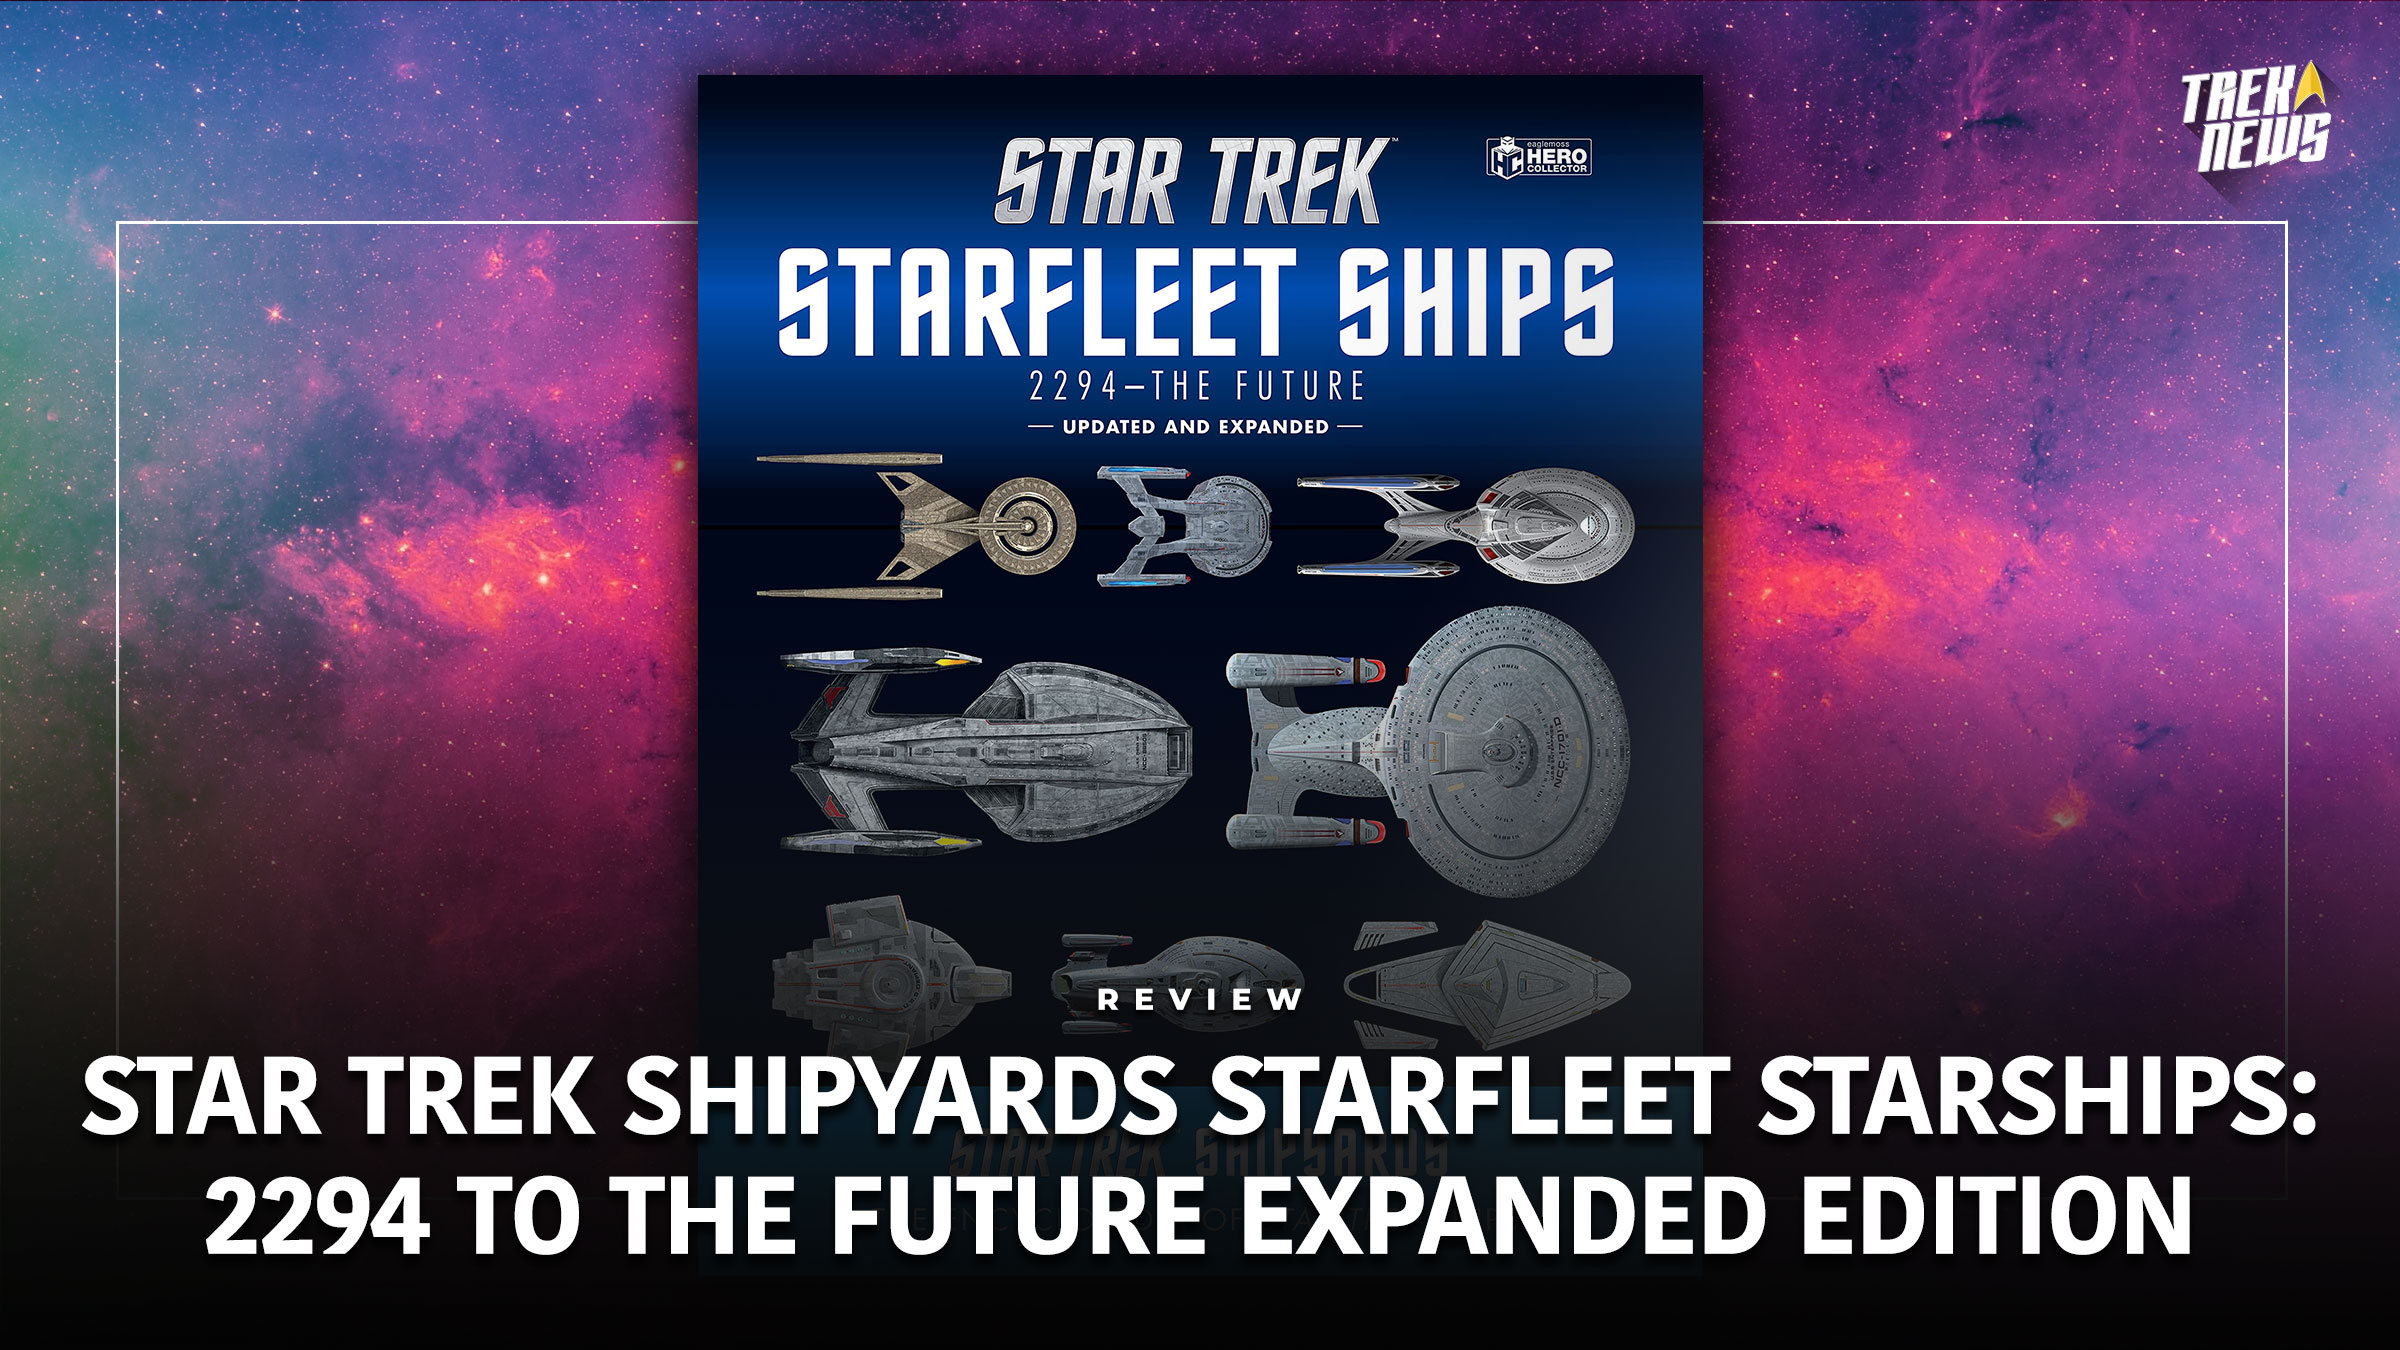 Star Trek Shipyards Starfleet Starships: 2294 To The Future Review: Newly Expanded Edition Adds Ships From ‘Discovery’ And ‘Picard’